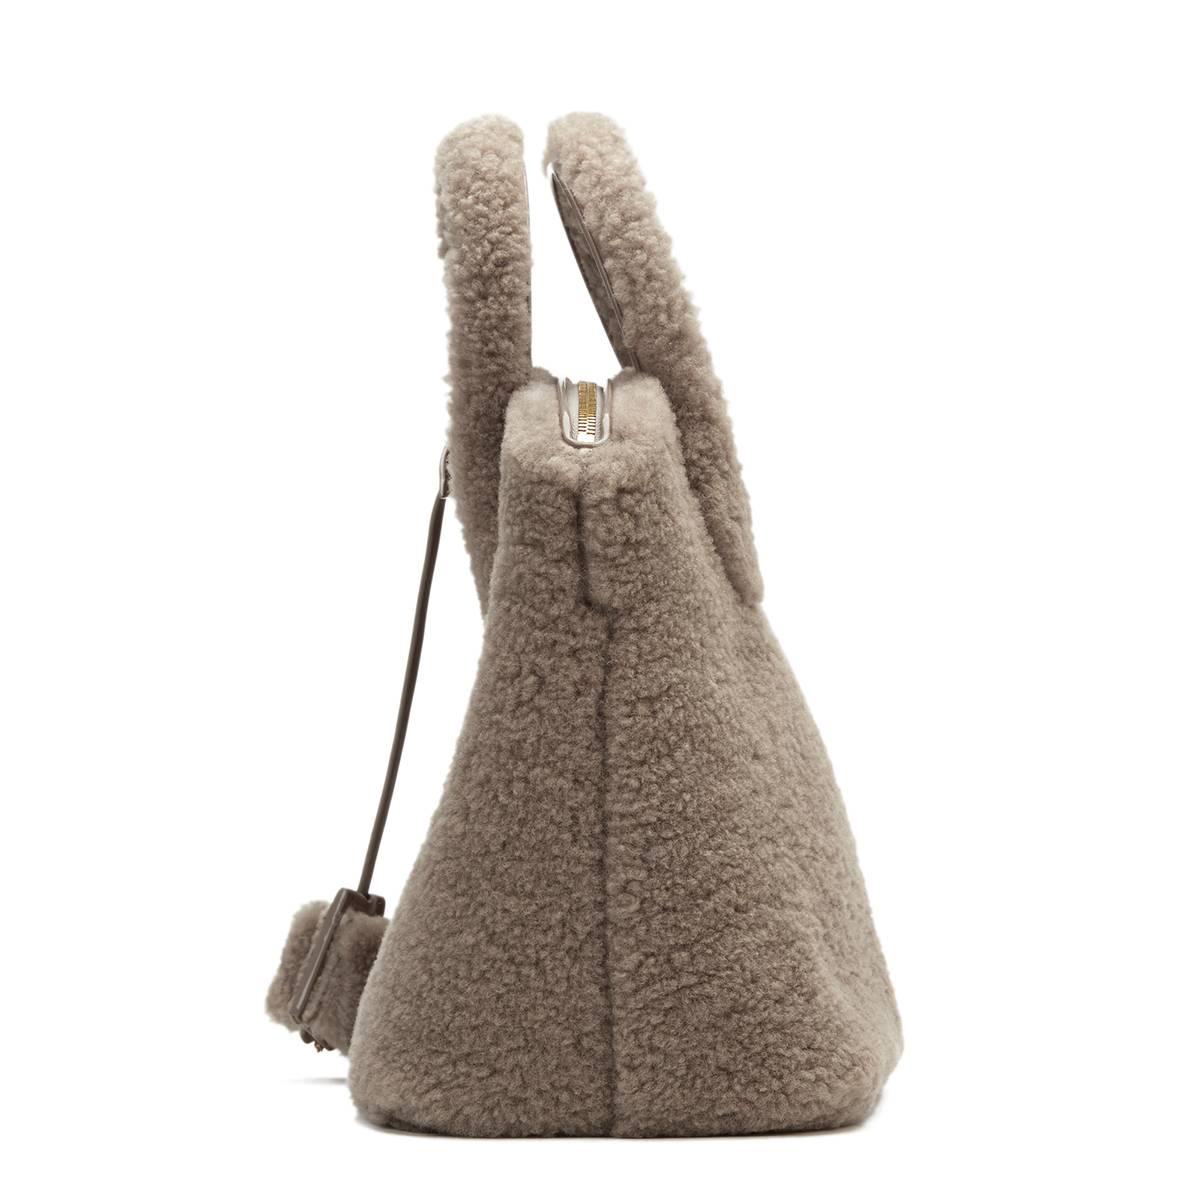 LOUIS VUITTON
Gris Shearling Lockit Pulsion

This LOUIS VUITTON Lockit Pulsion is in Excellent Pre-Owned Condition accompanied by Louis Vuitton Dust Bag, Lock, Keys, Clochette, Handle Keeper, Care Booklet. Circa 2011. Primarily made from Shearling